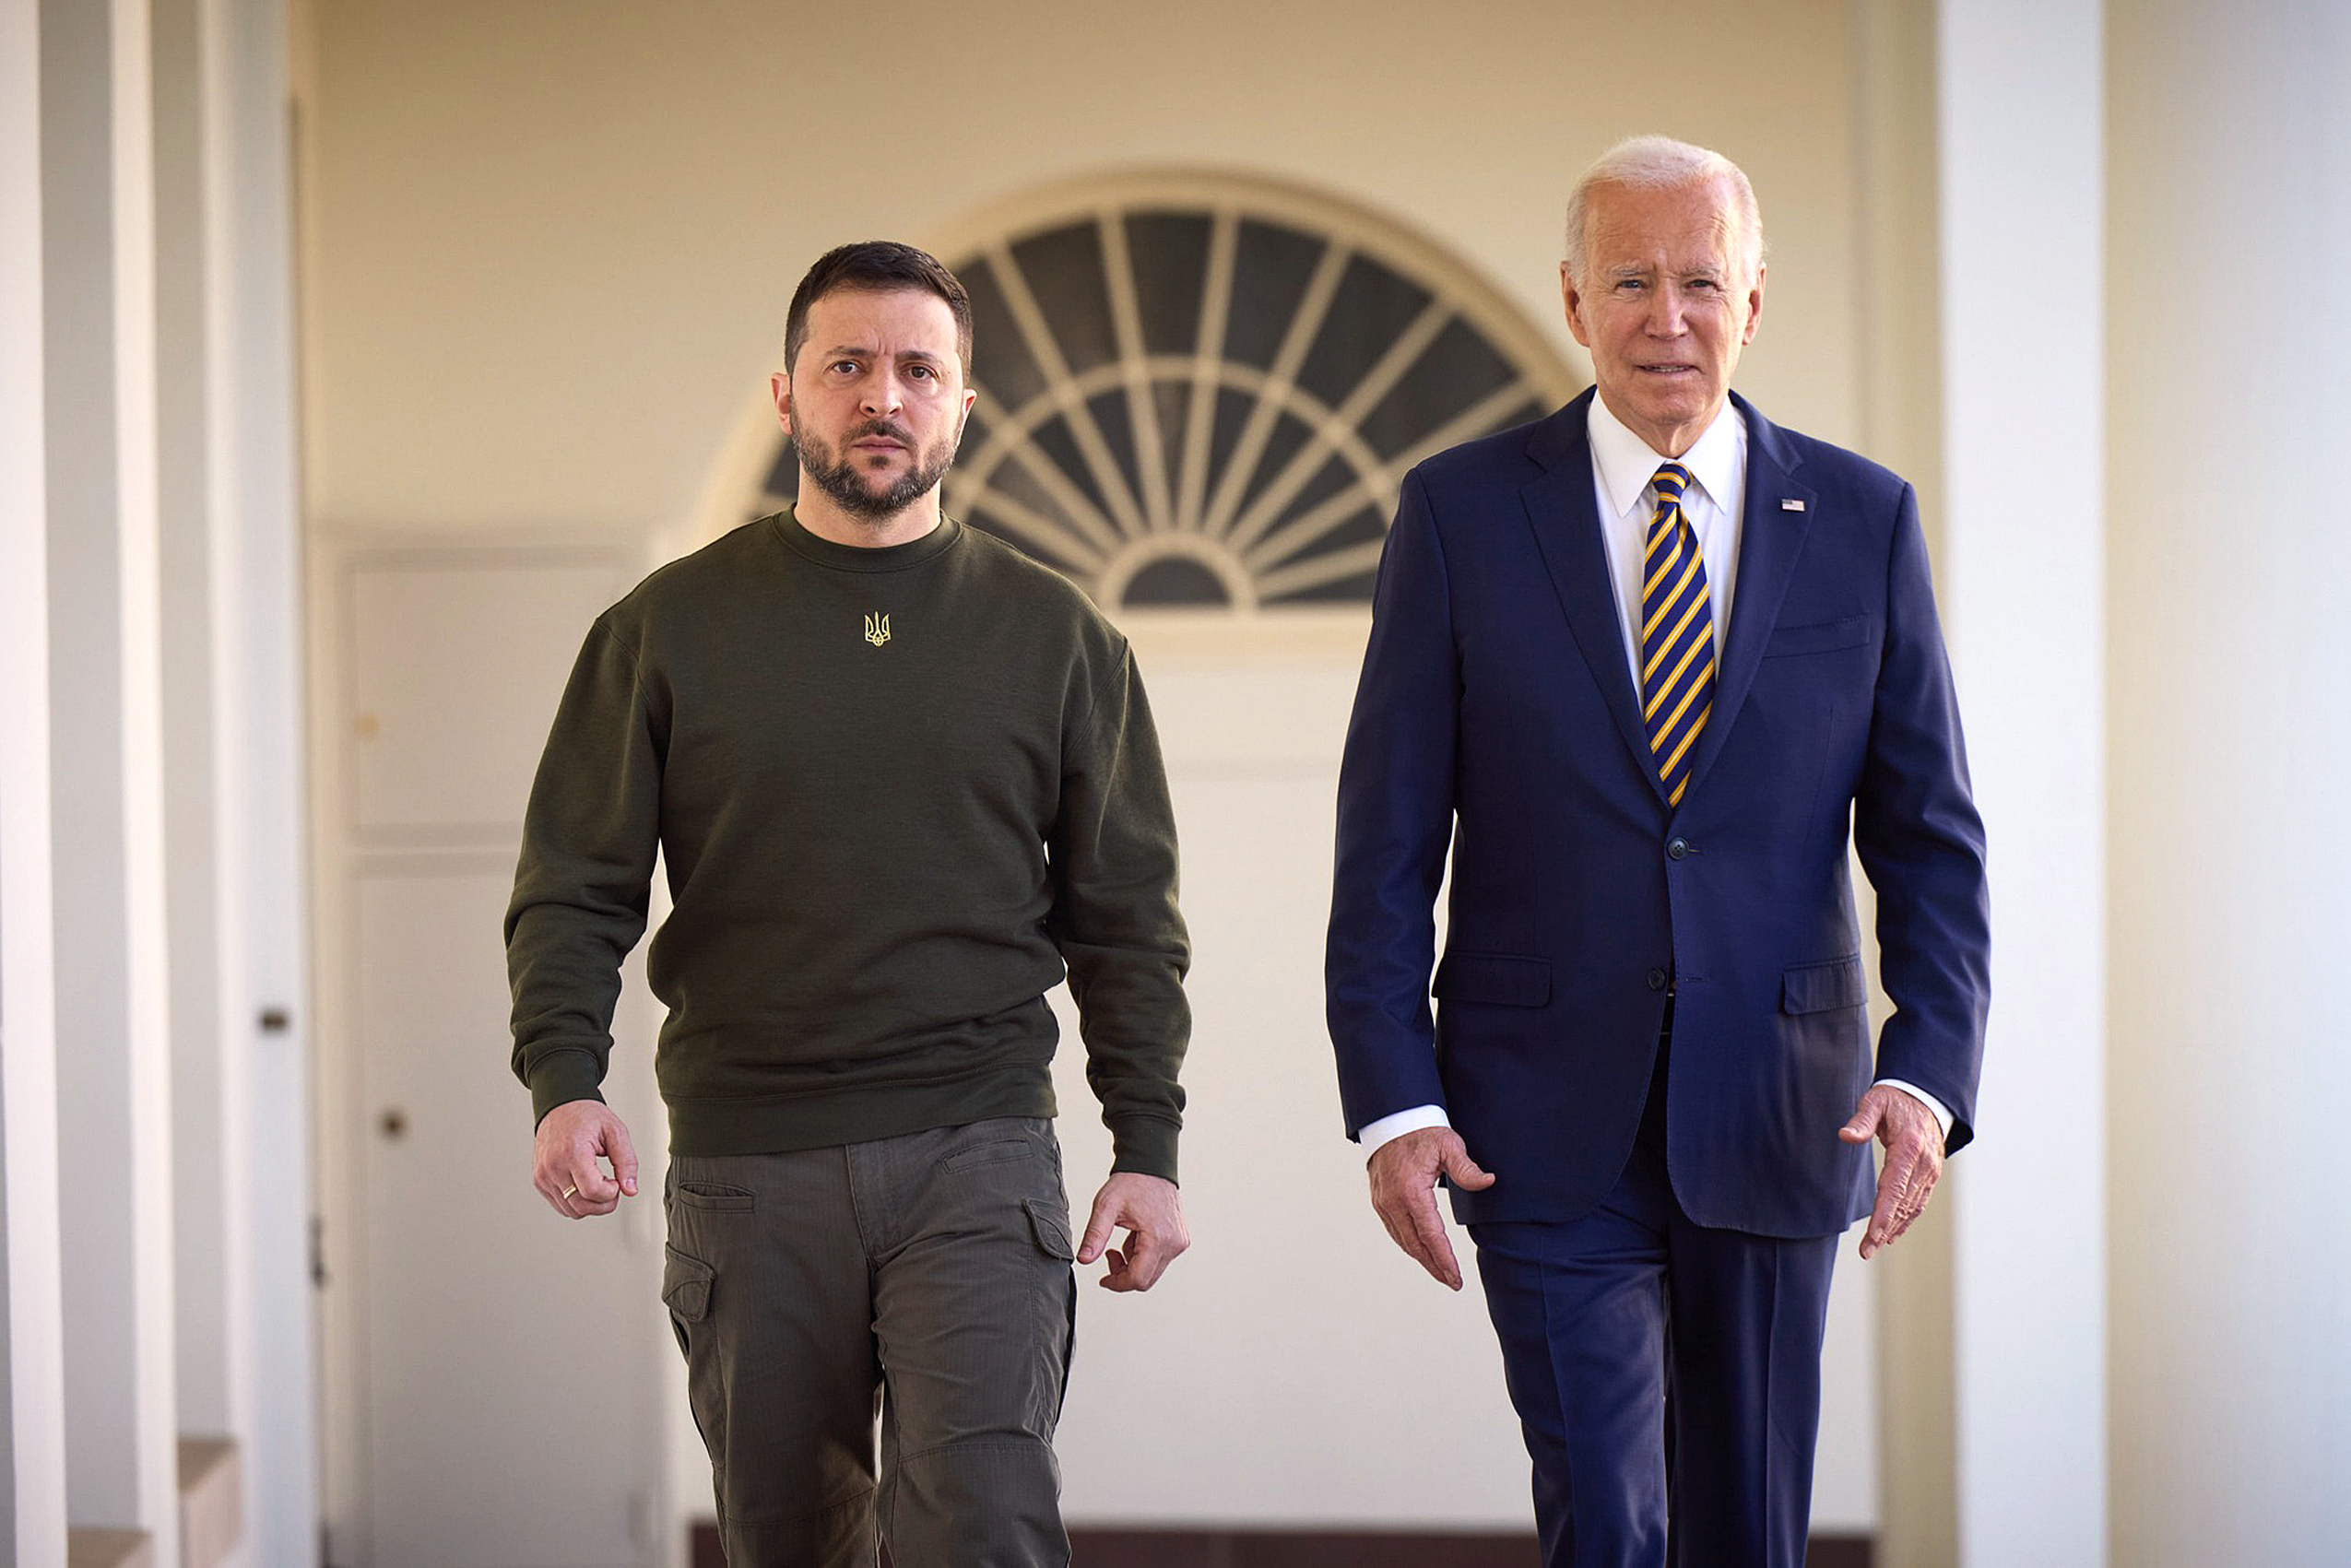 December 21, 2022, Washington, District Of Columbia, USA: President of Ukraine VOLODYMYR ZELENSKY, left, walks along the colonnade with US President JOE BIDEN at the White House in a historic visit to Washington. It's his first foreign trip since Russia invaded his country in February. Zelensky says he's in the US to 'thank the American people.' (Credit Image: Global Look Press/Keystone Press Agency)